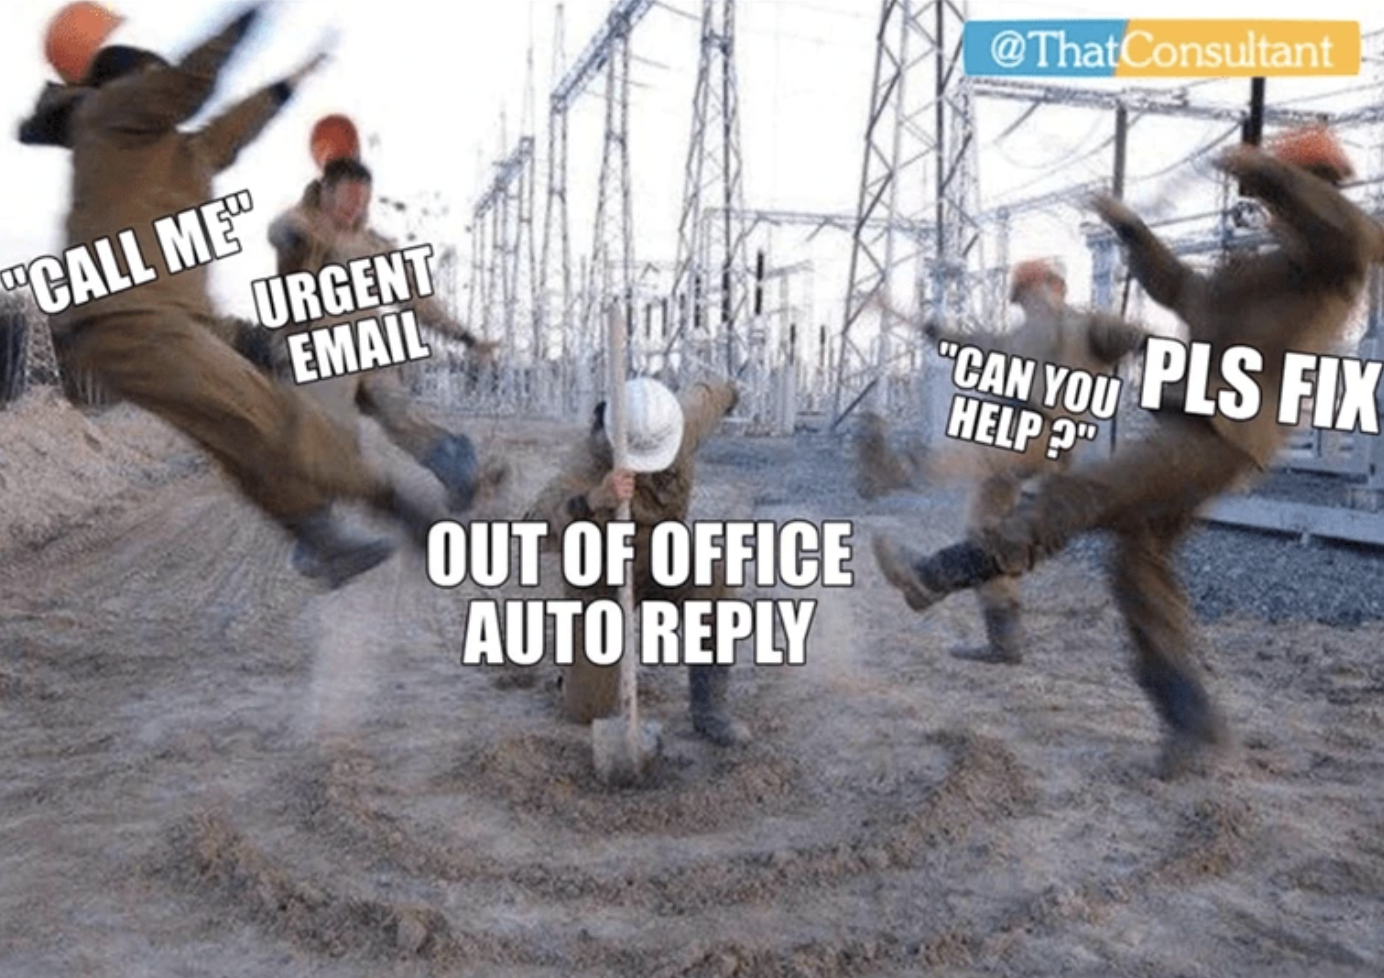 Meme - "Call Me Urgent Email Out Of Office Auto "Can You Help?" Pls Fix